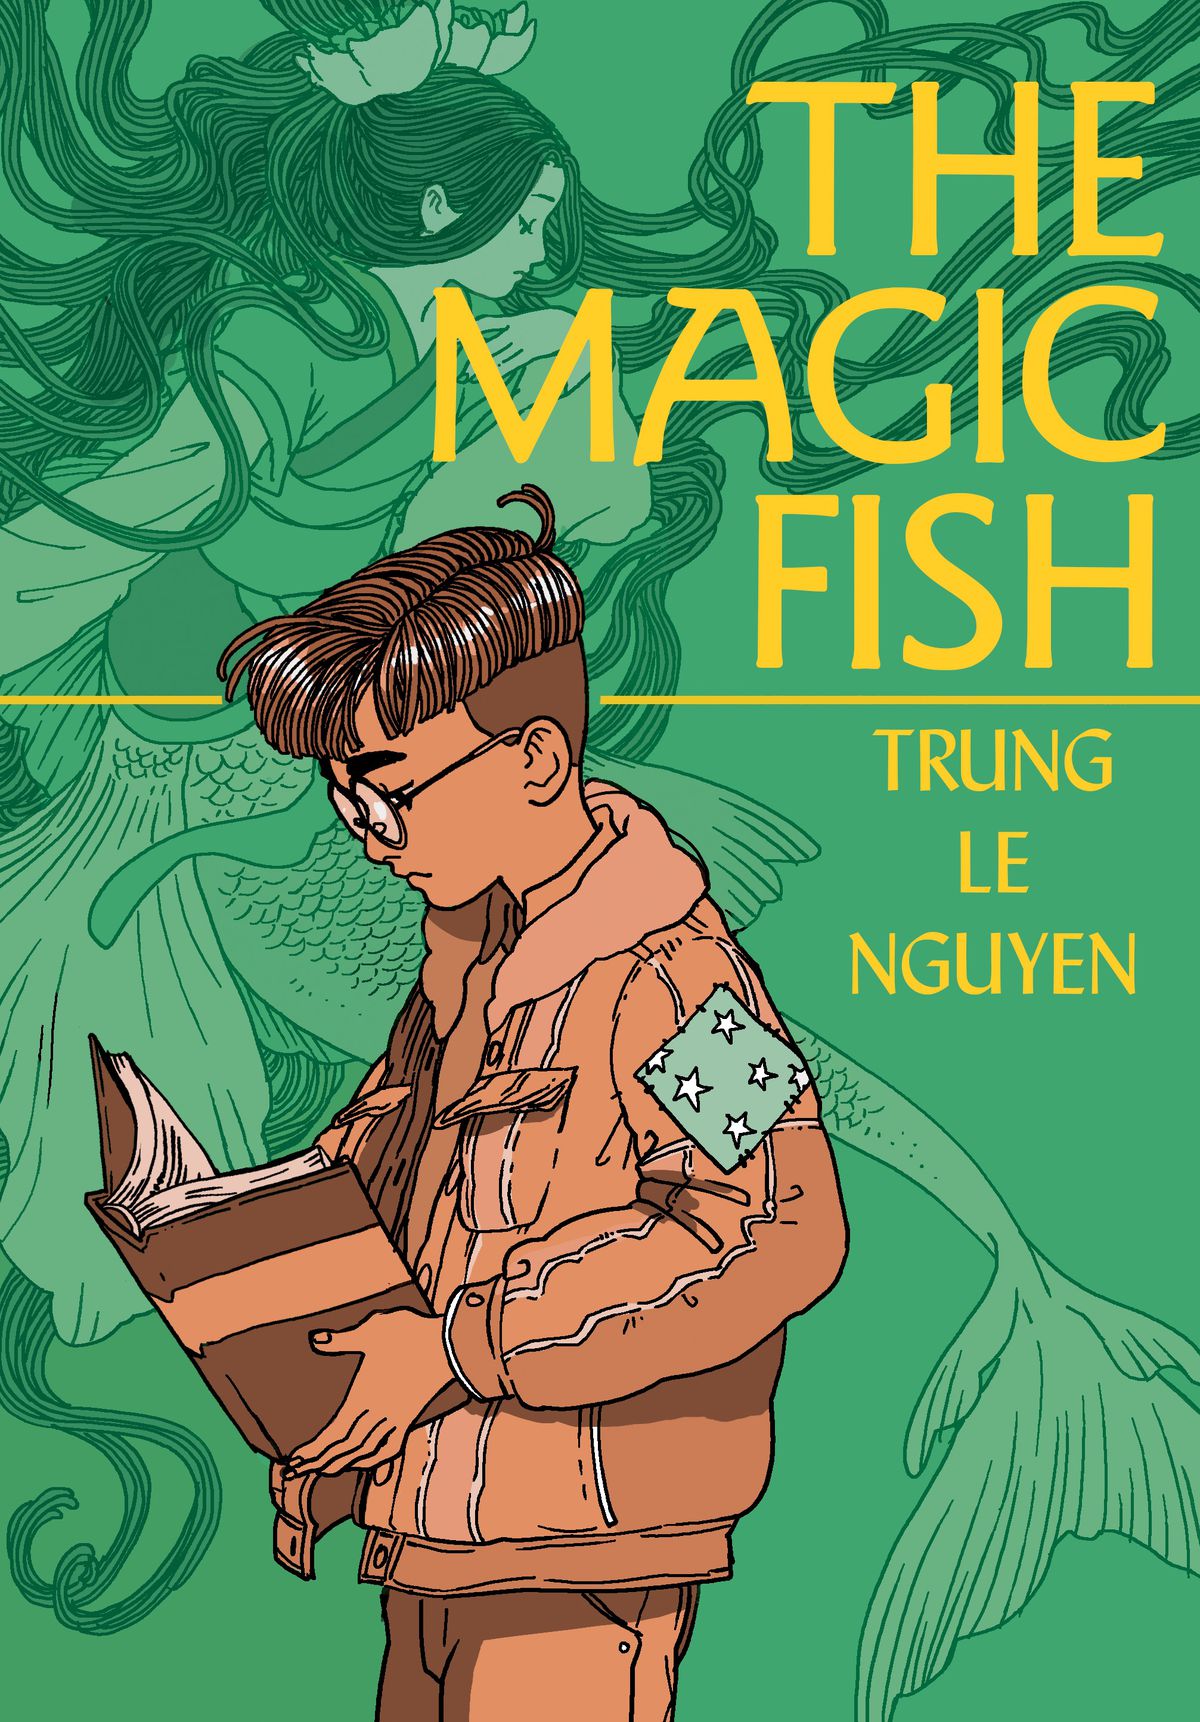 Tiến, a young Vietnamese-American boy, reads a book on the cover of The Magic Fish (2020).